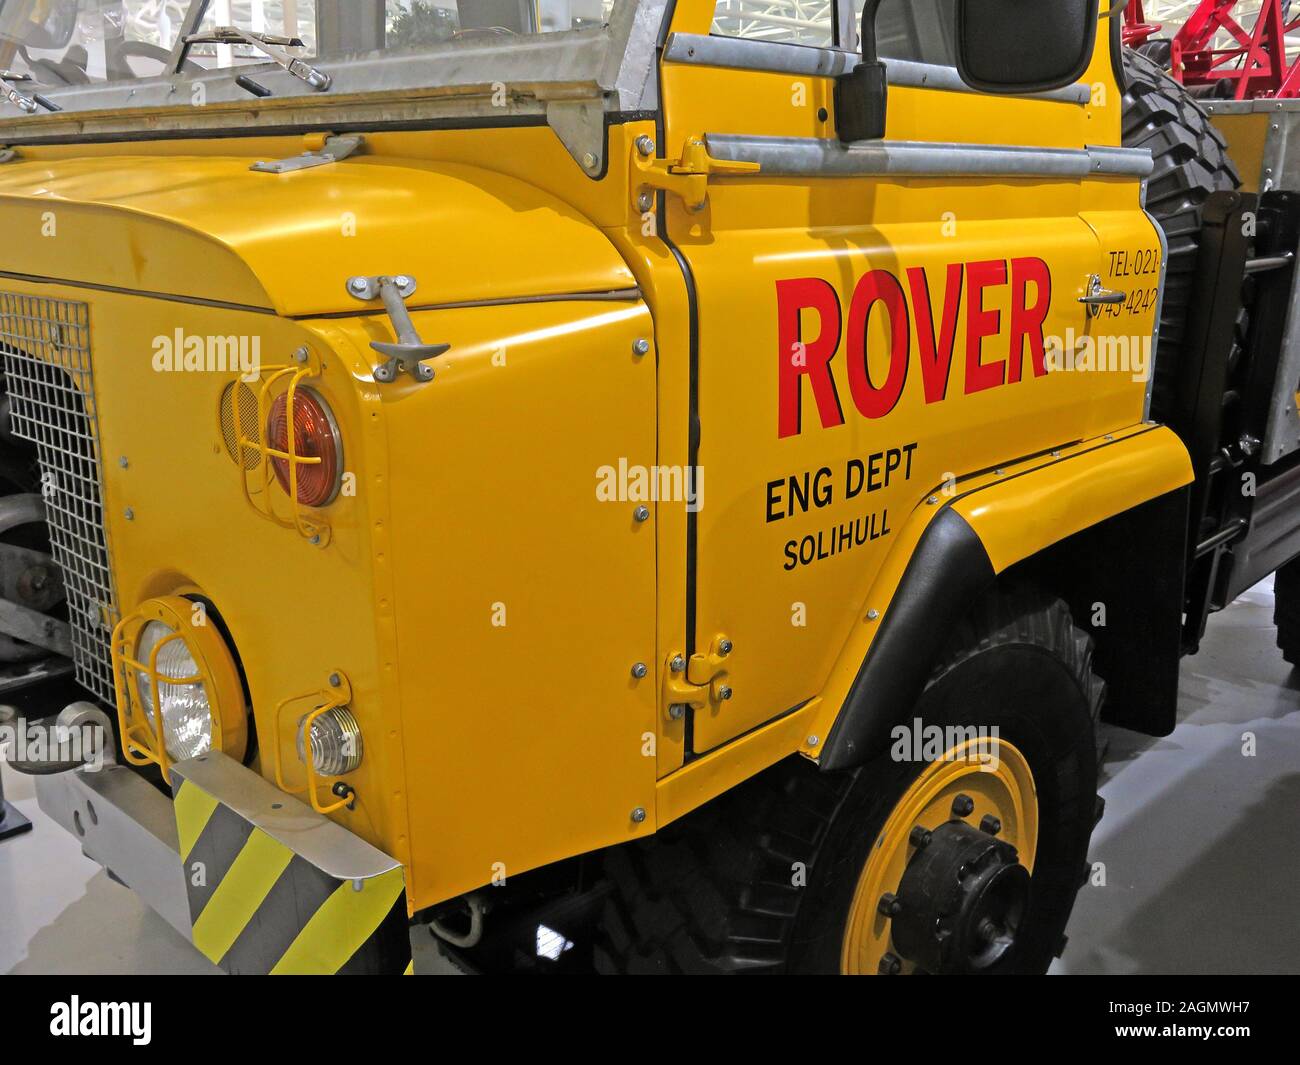 Rover Engineering Department, Yellow Rover Engineering Dep Solihull Truck, Rover Eng Dept,recovery vehicle Stock Photo